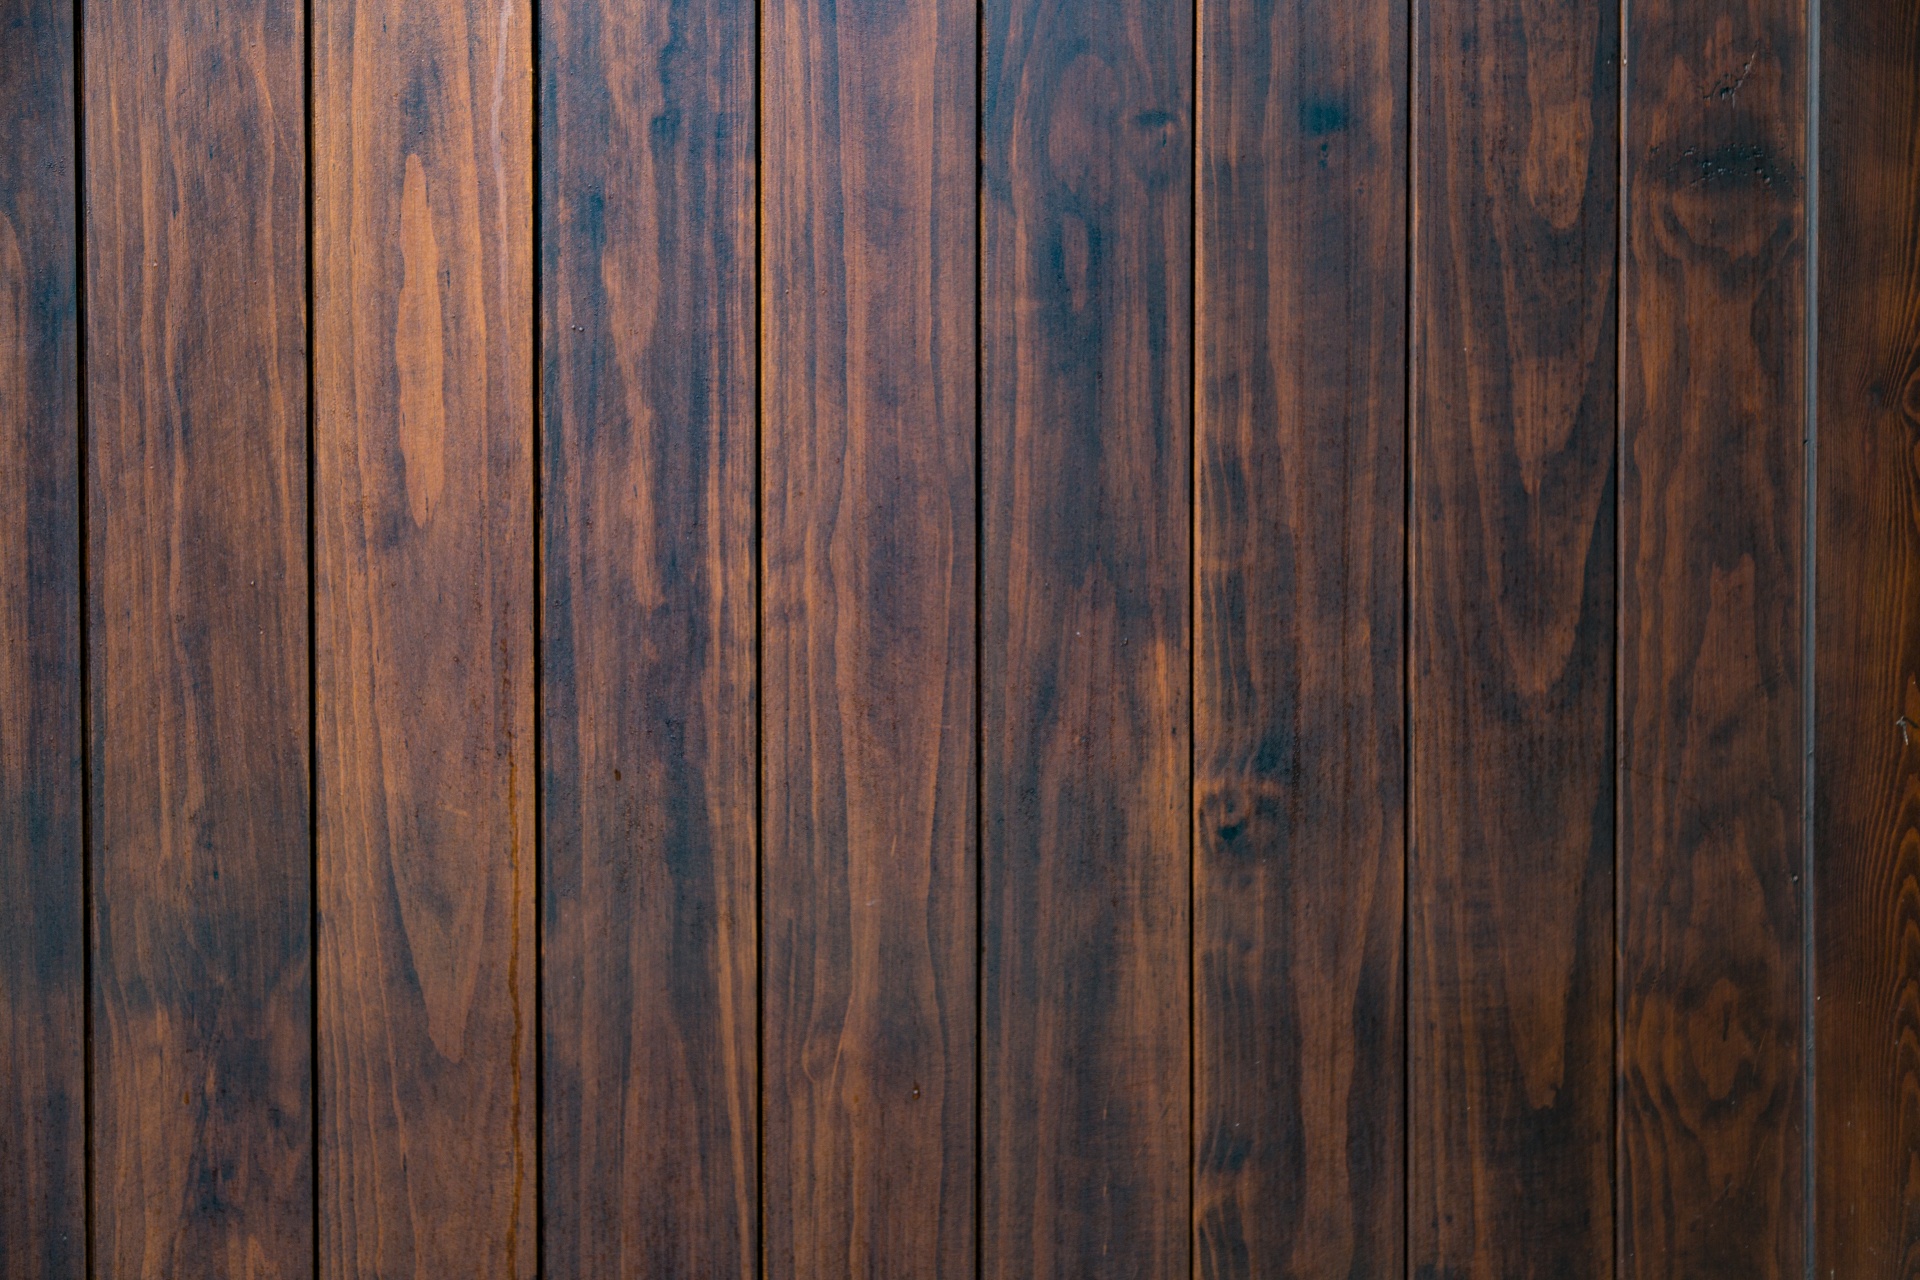 Wooden Wall